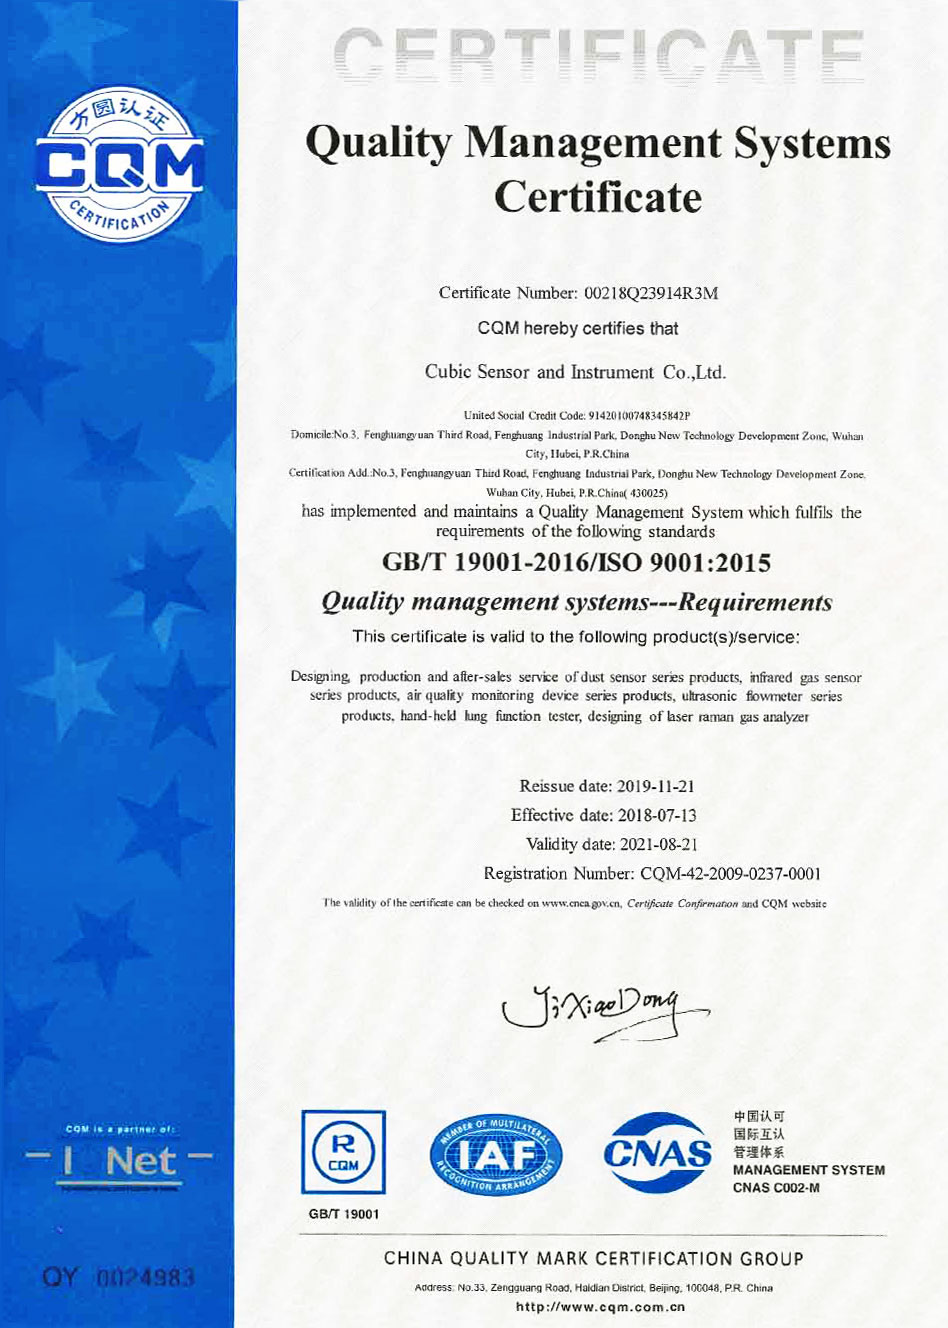 Cubic ISO9001 2015